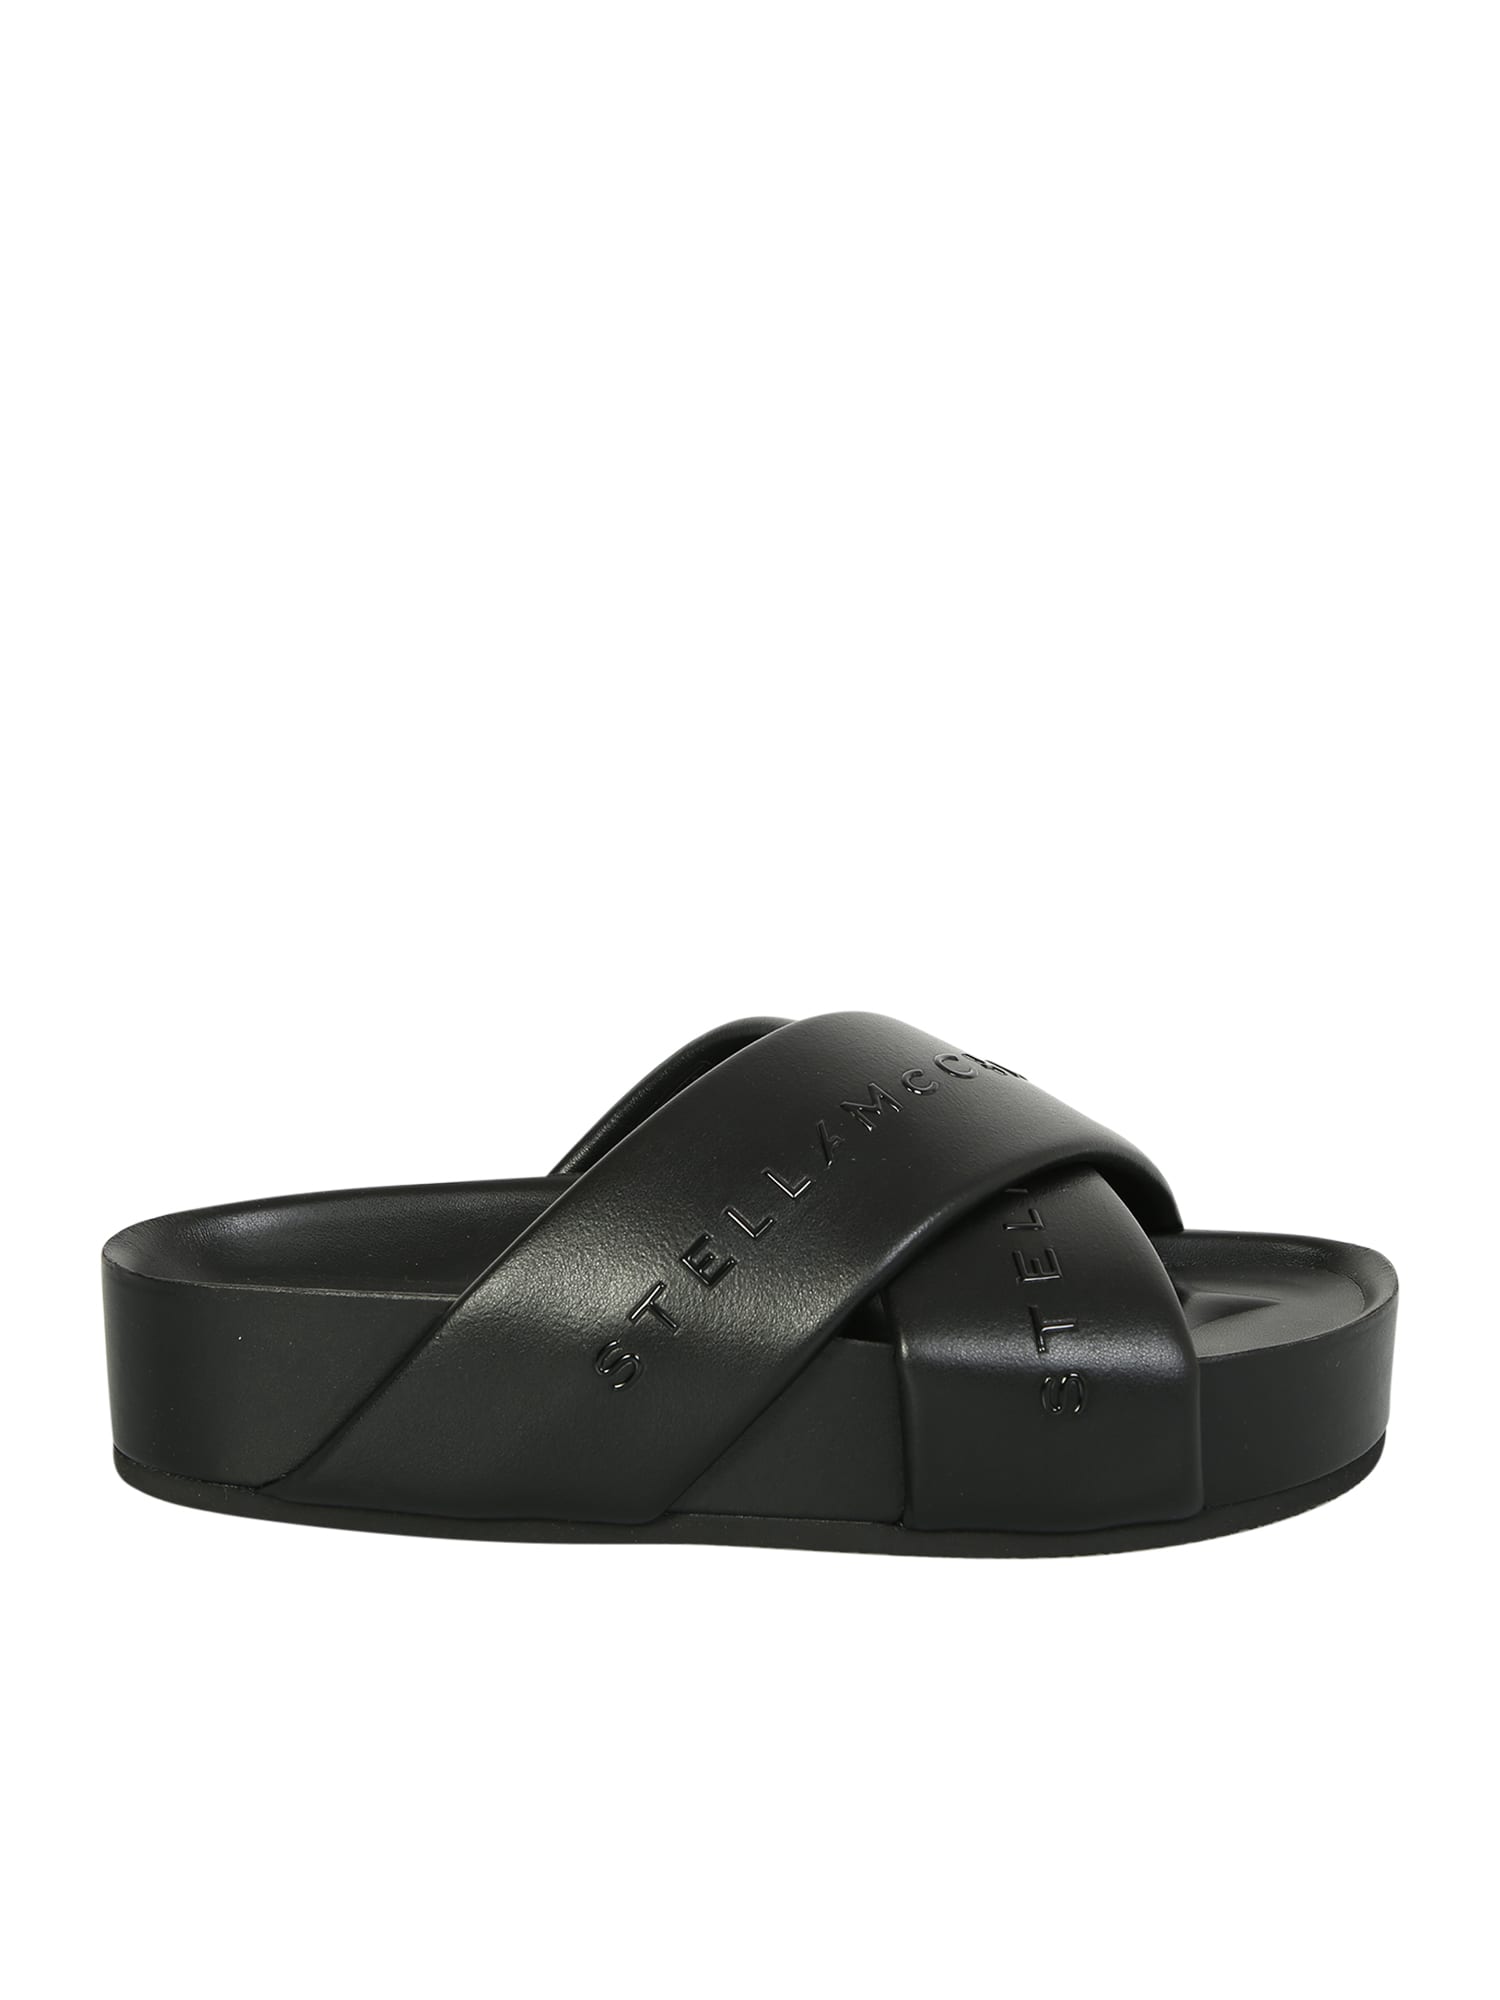 Flatform Sandal By Stella Mccartney, With Guaranteed Comfort And Made In Line With The Idea Of Sustainability That Always Distinguishes This Maison